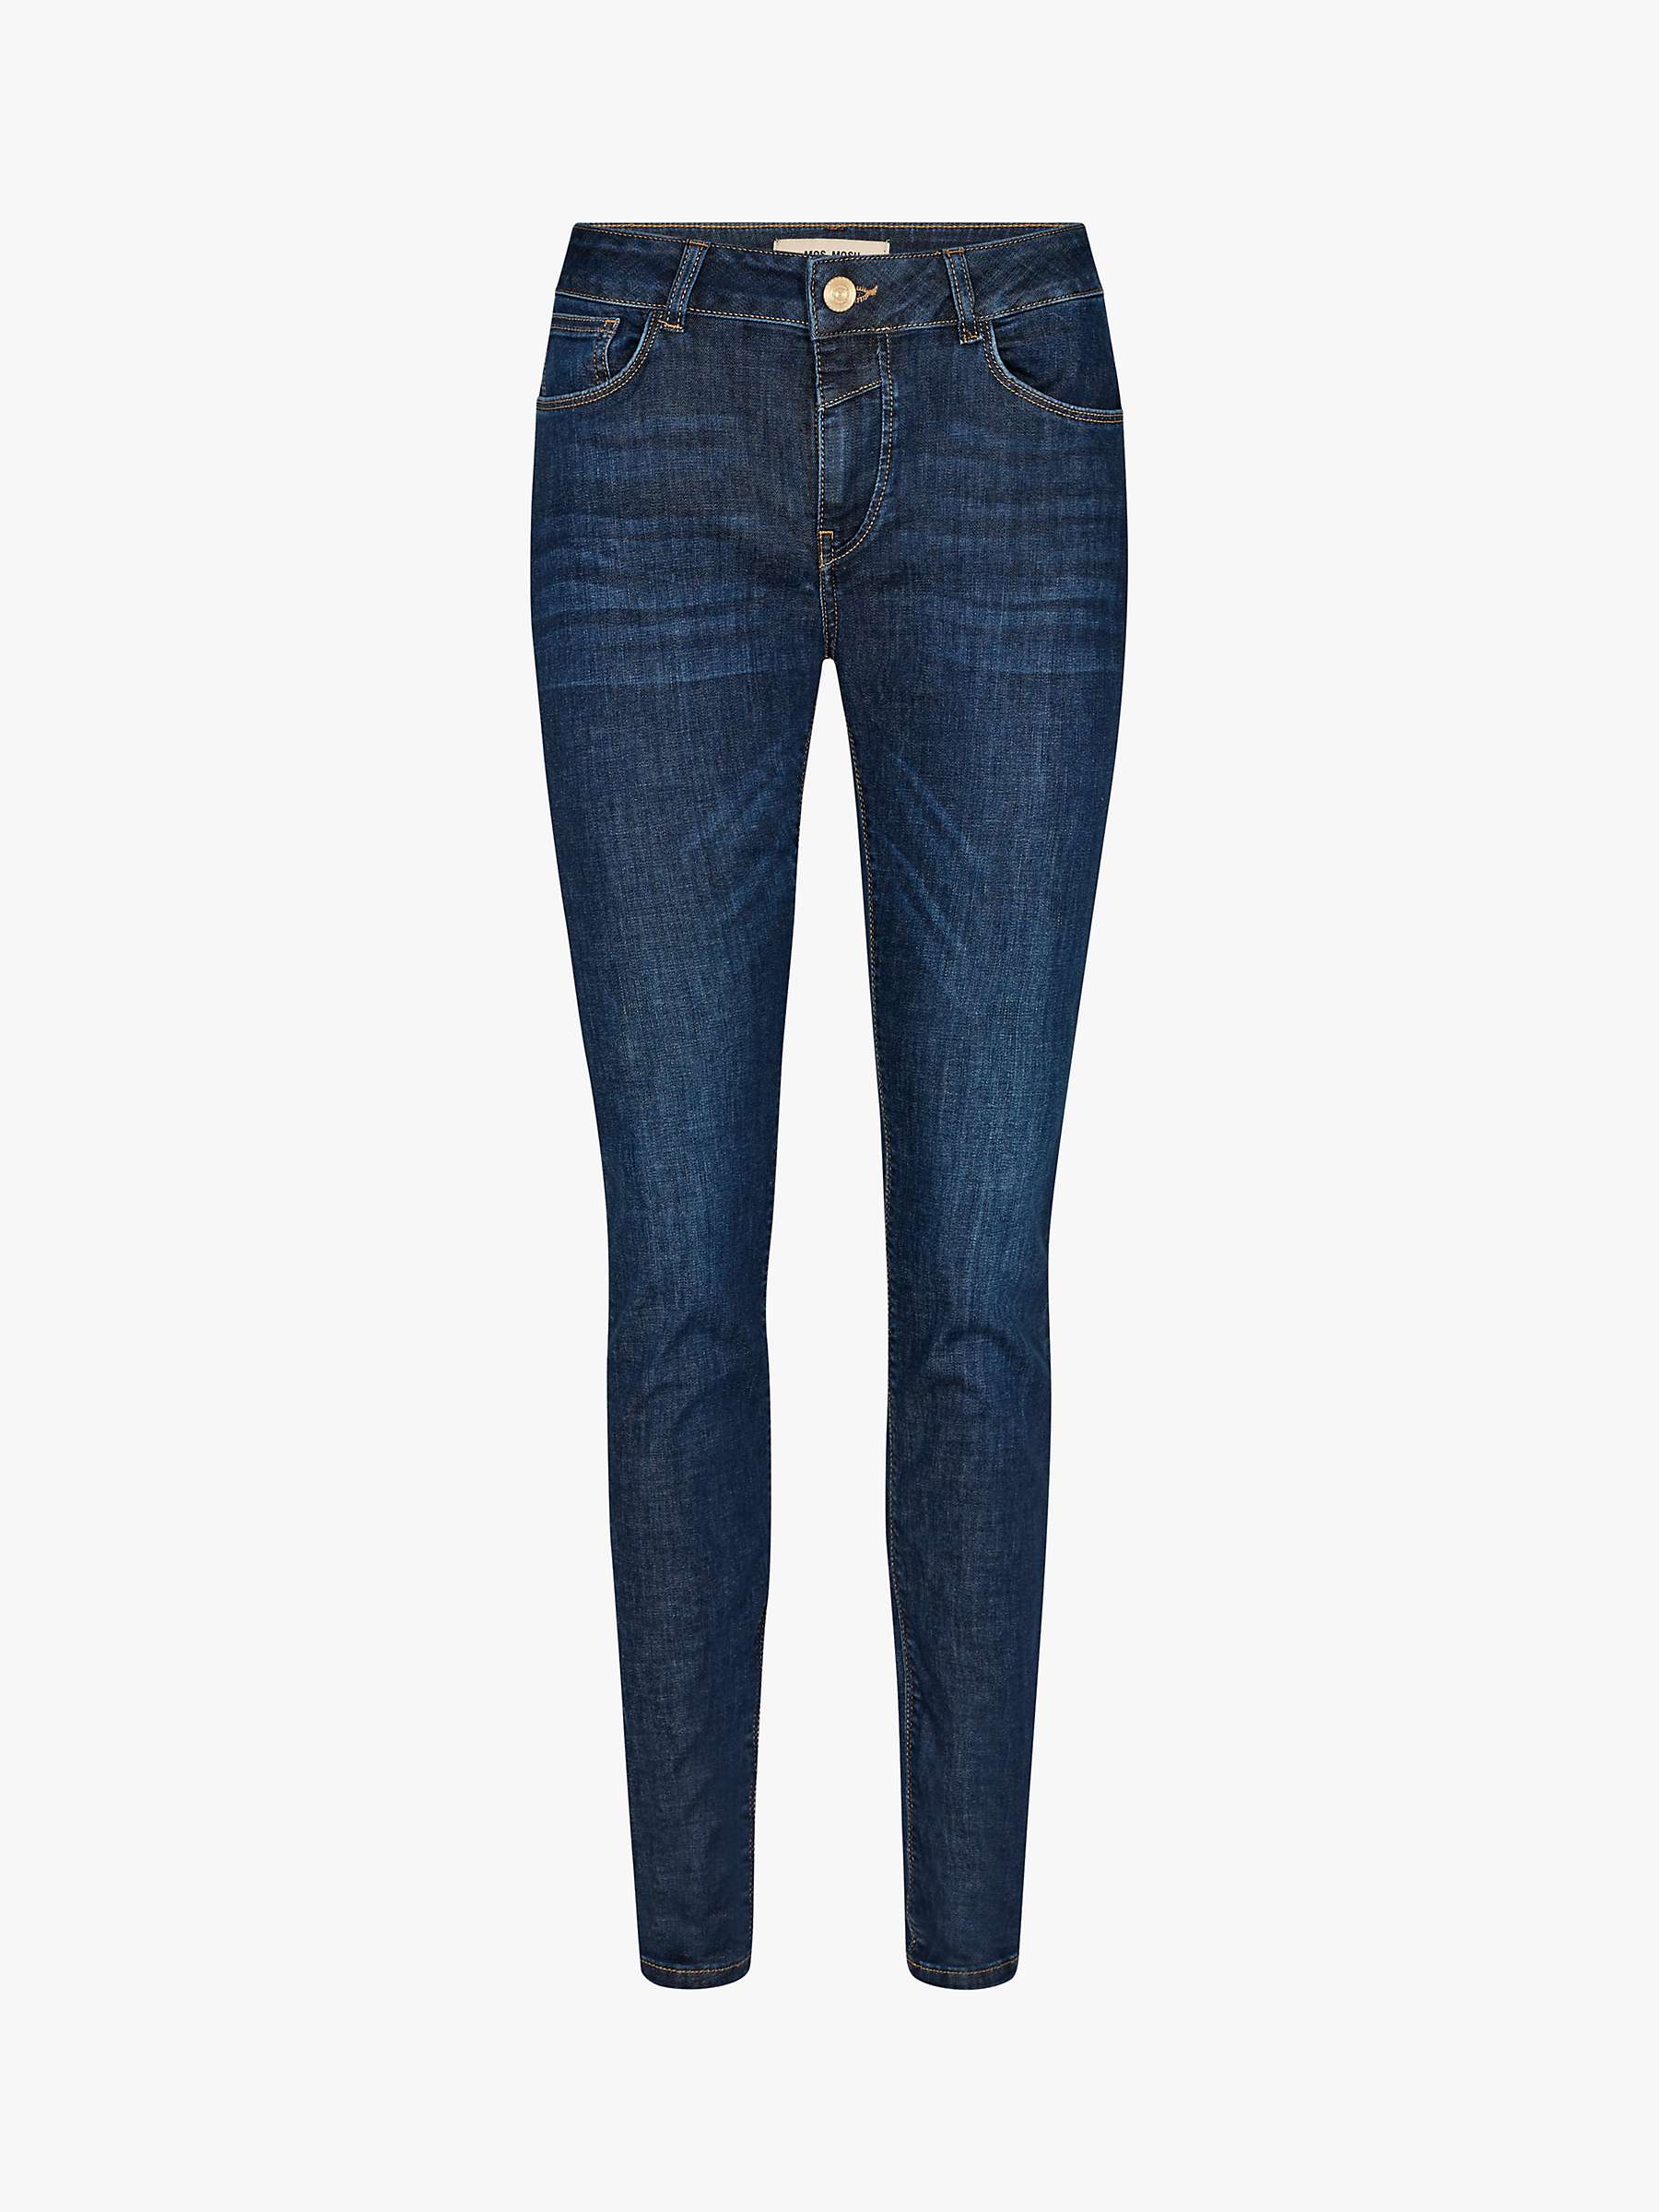 Buy MOS MOSH Naomi Tailored Fit Jeans Online at johnlewis.com